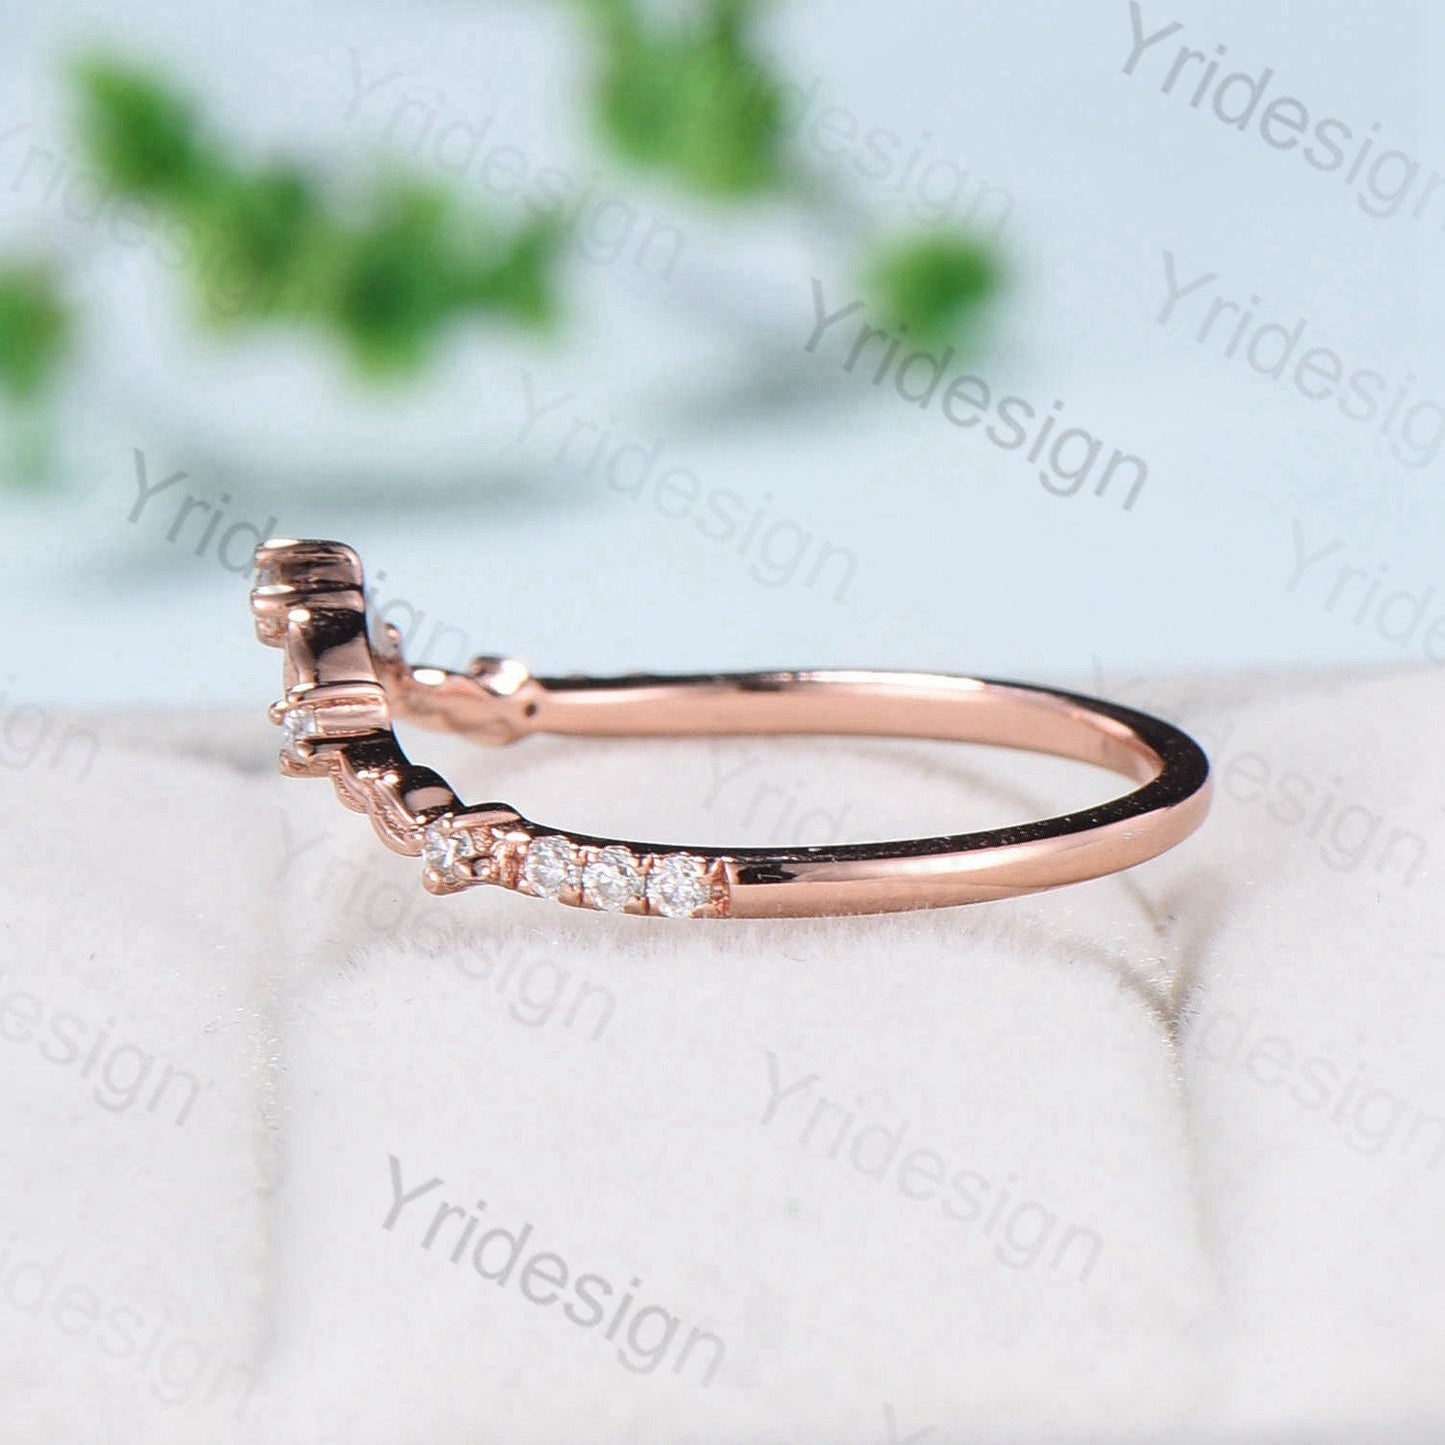 Curved V wedding band rose gold twisted diamond matching band for women unique art deco stacking ring moissanite matching stacking band - PENFINE